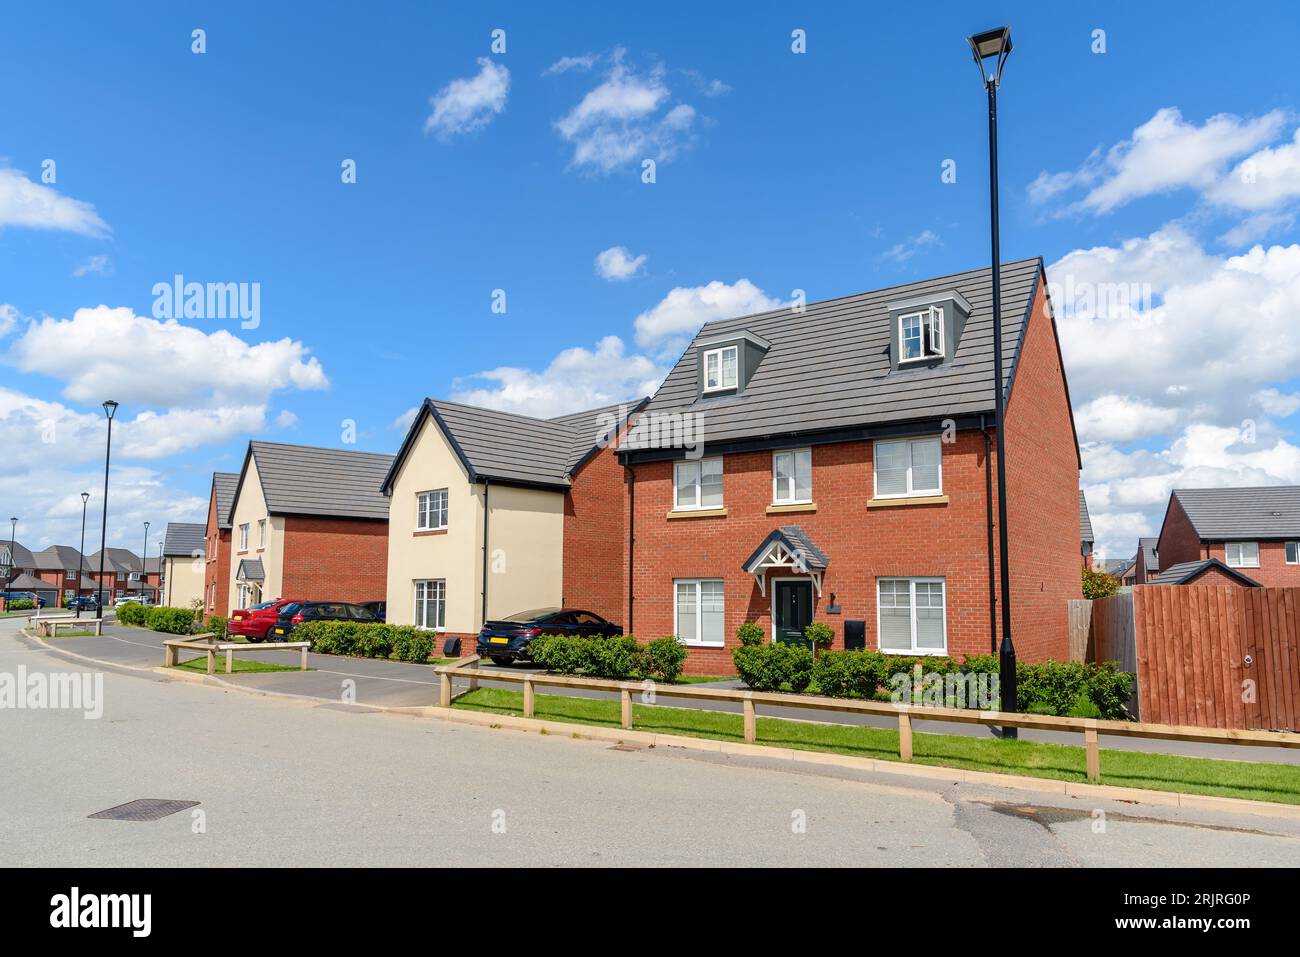 New bick detached houses in housing devlopment on a clear summer day Stock Photo